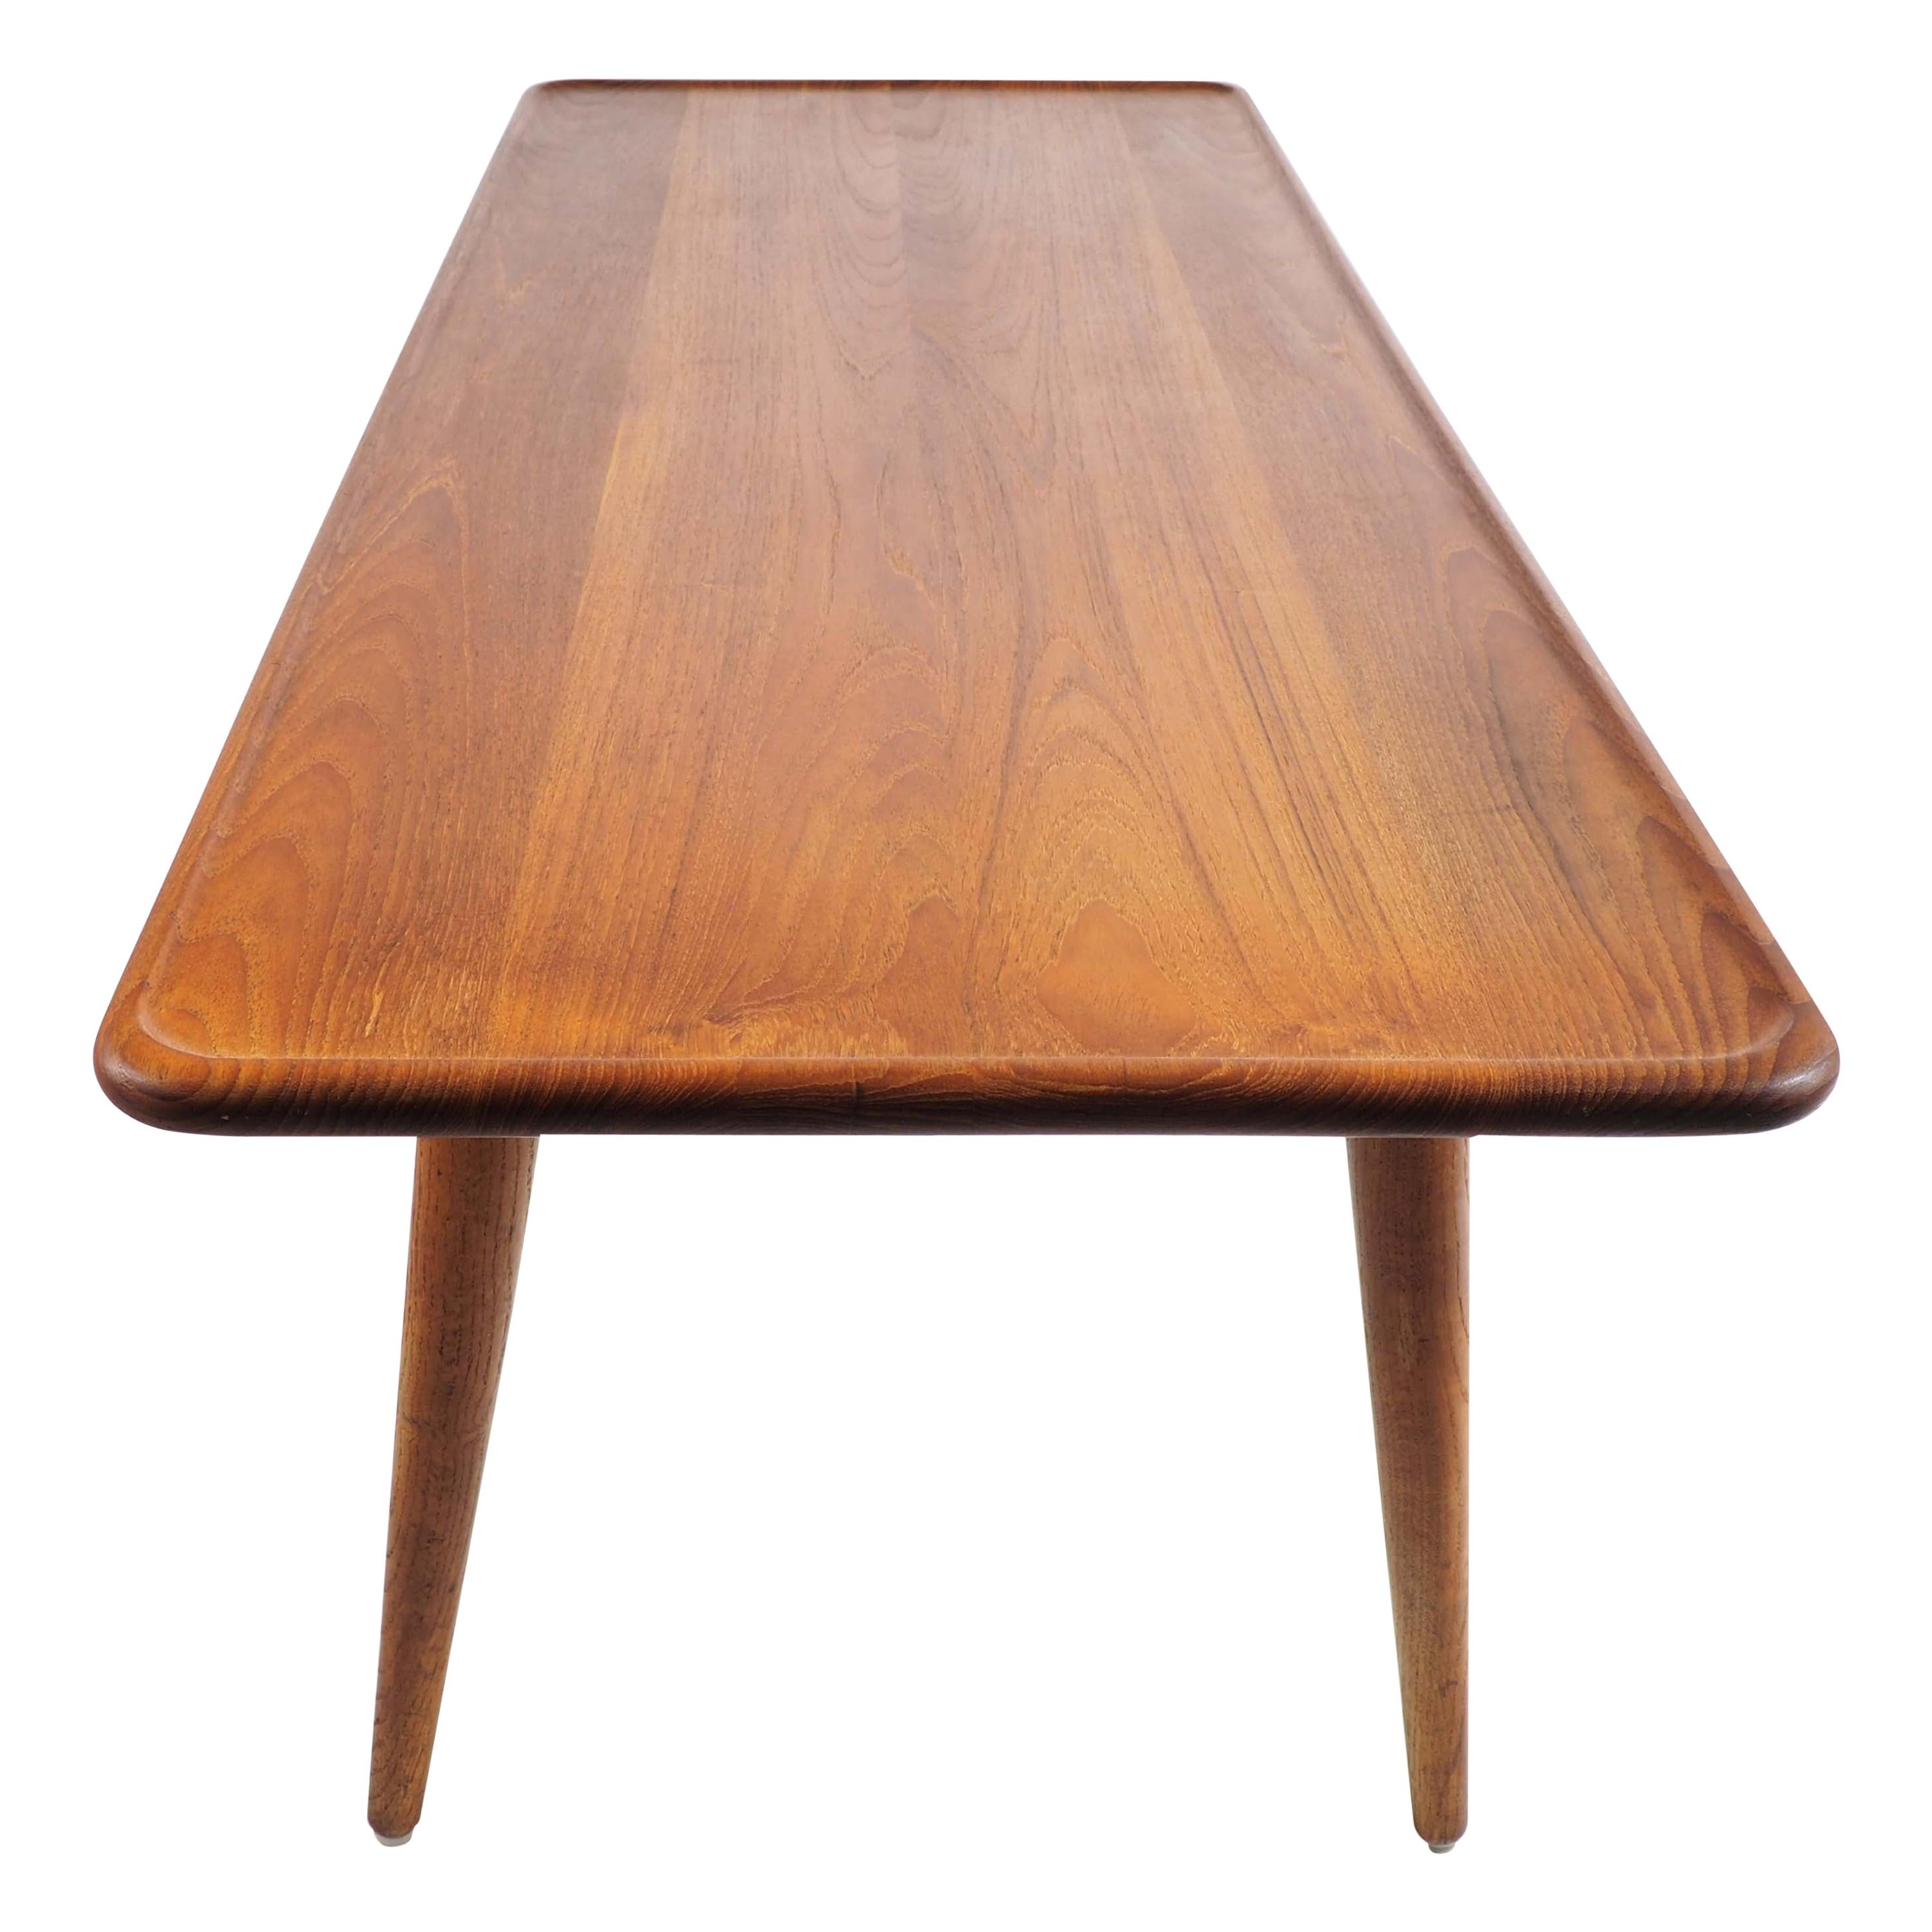 This high quality coffee table was designed by Hans Wegner in the 1950s. It was produced and marked by cabinet maker Andreas Tuck, Denmark, and made with a tabletop in solid teak and legs in solid oak.
The sculptured lip and the rounded corners